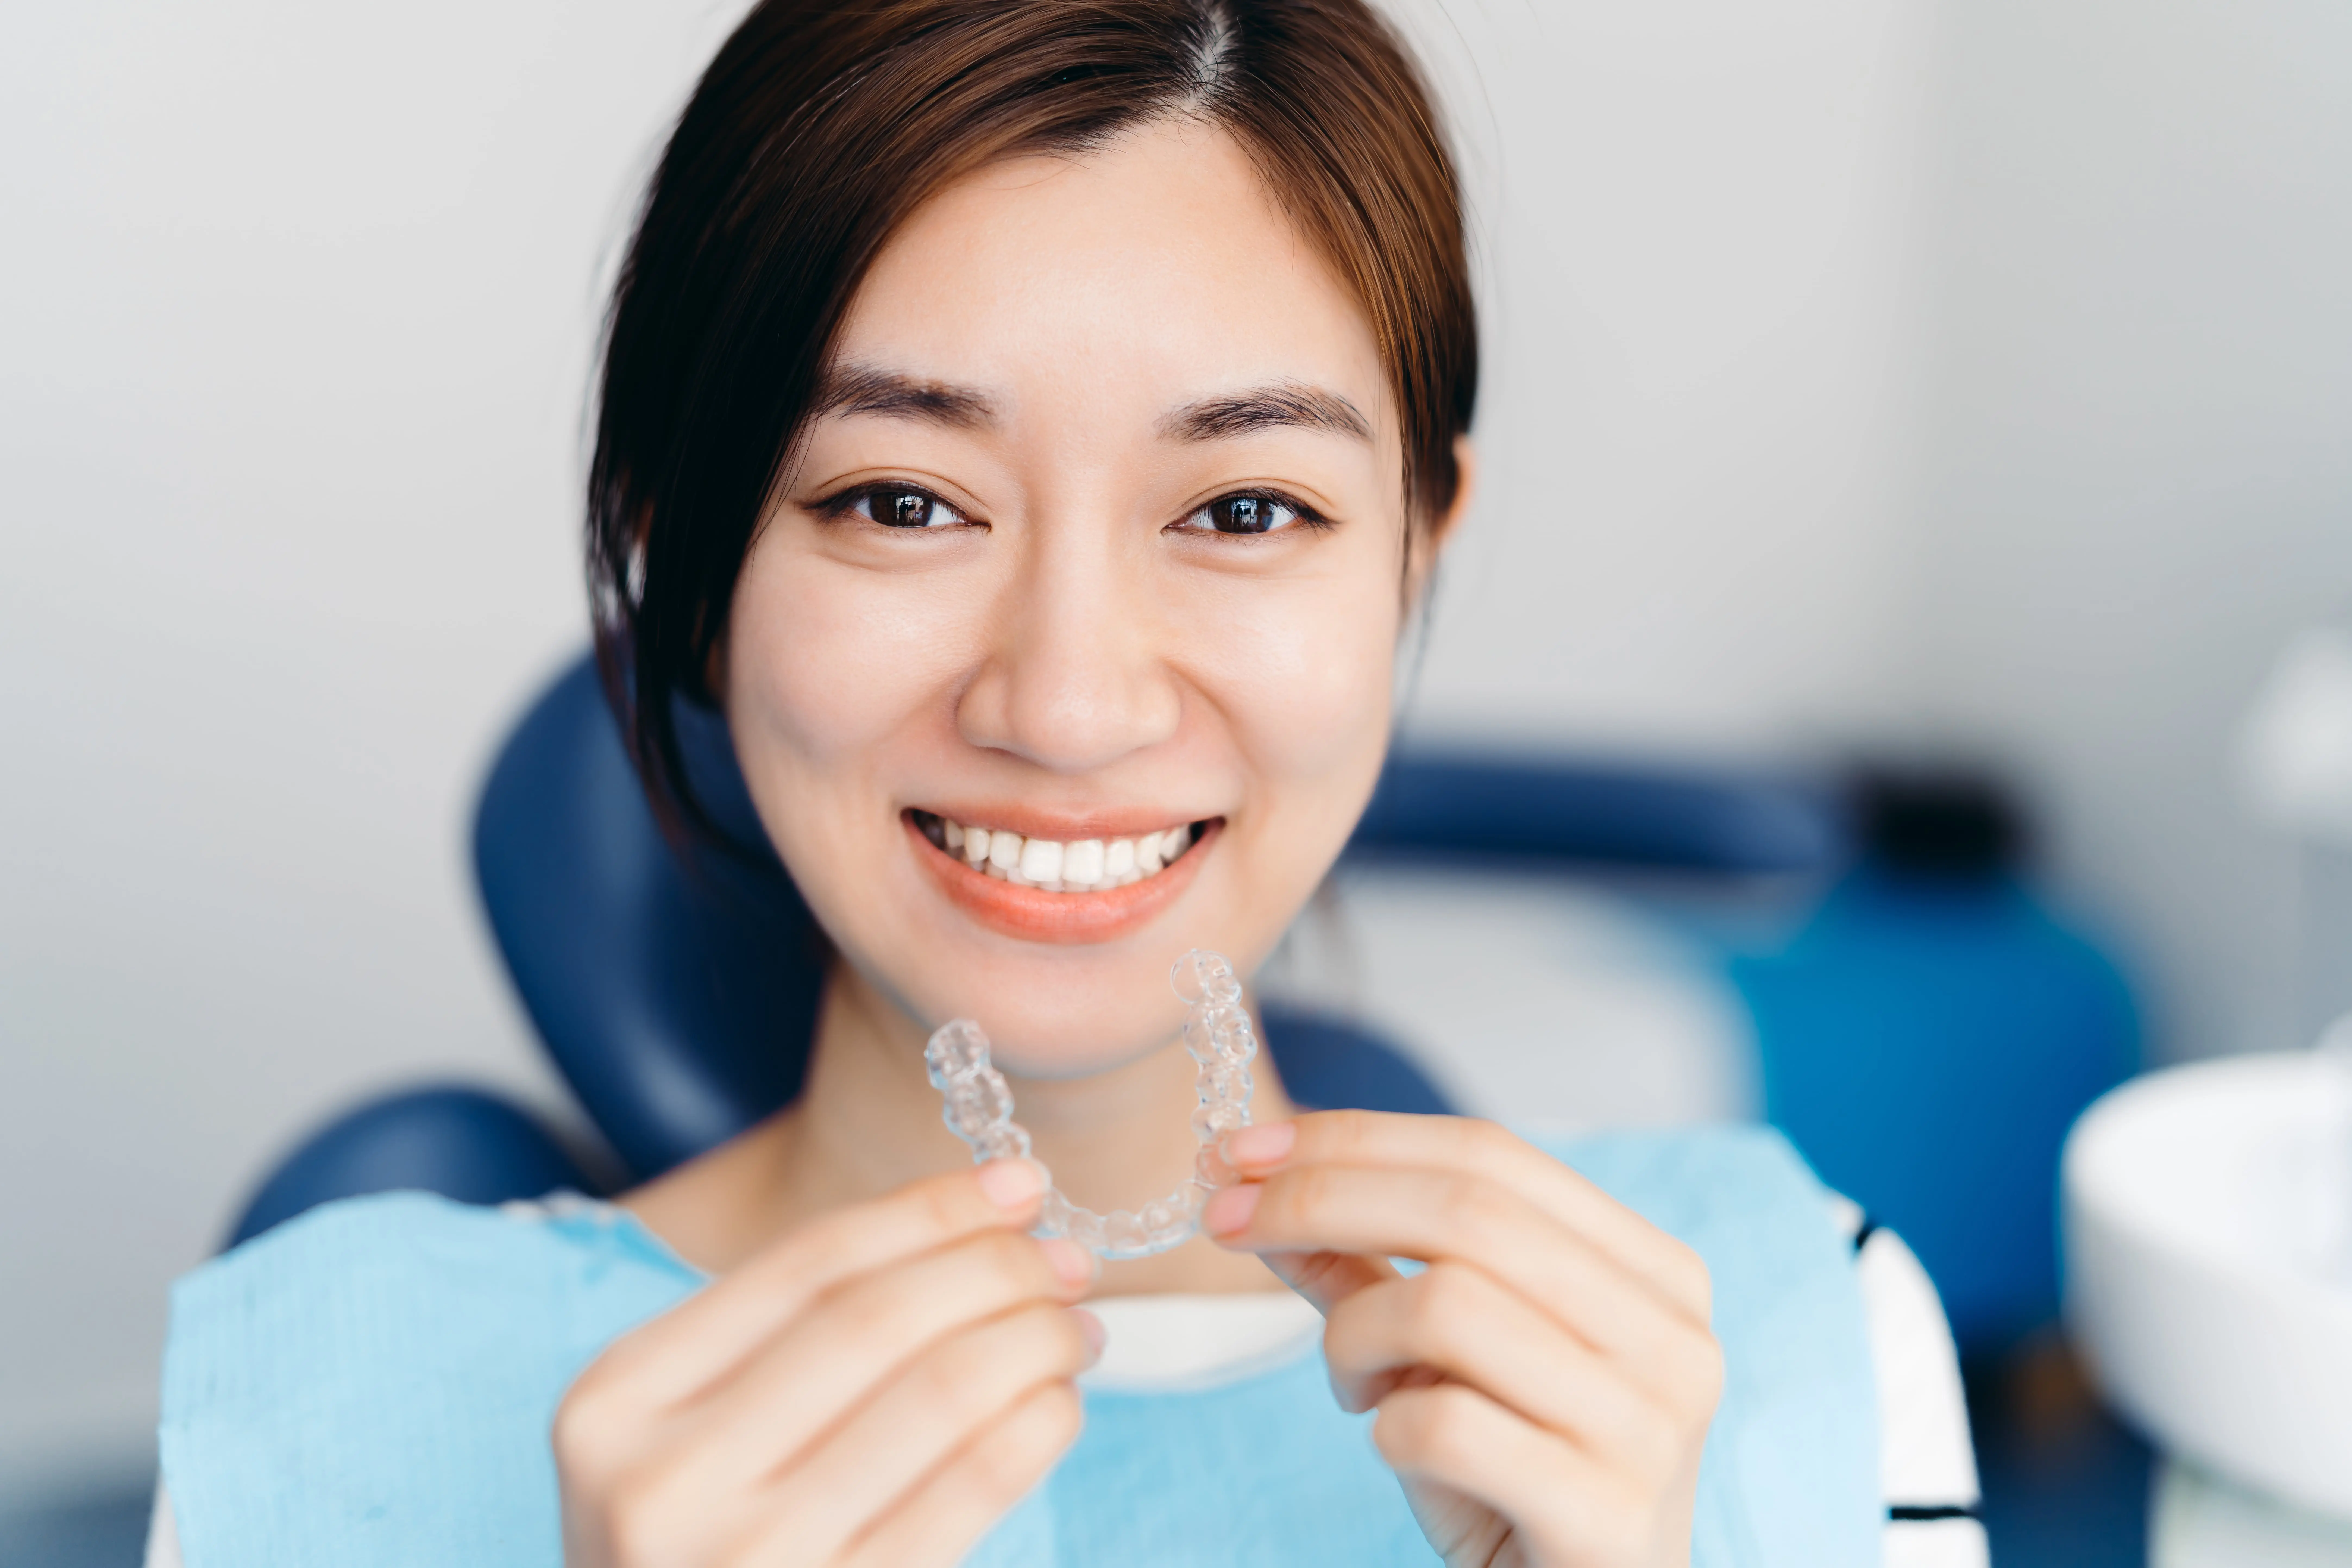 s 30 Too Old for Invisalign? Let's Debunk the Myth